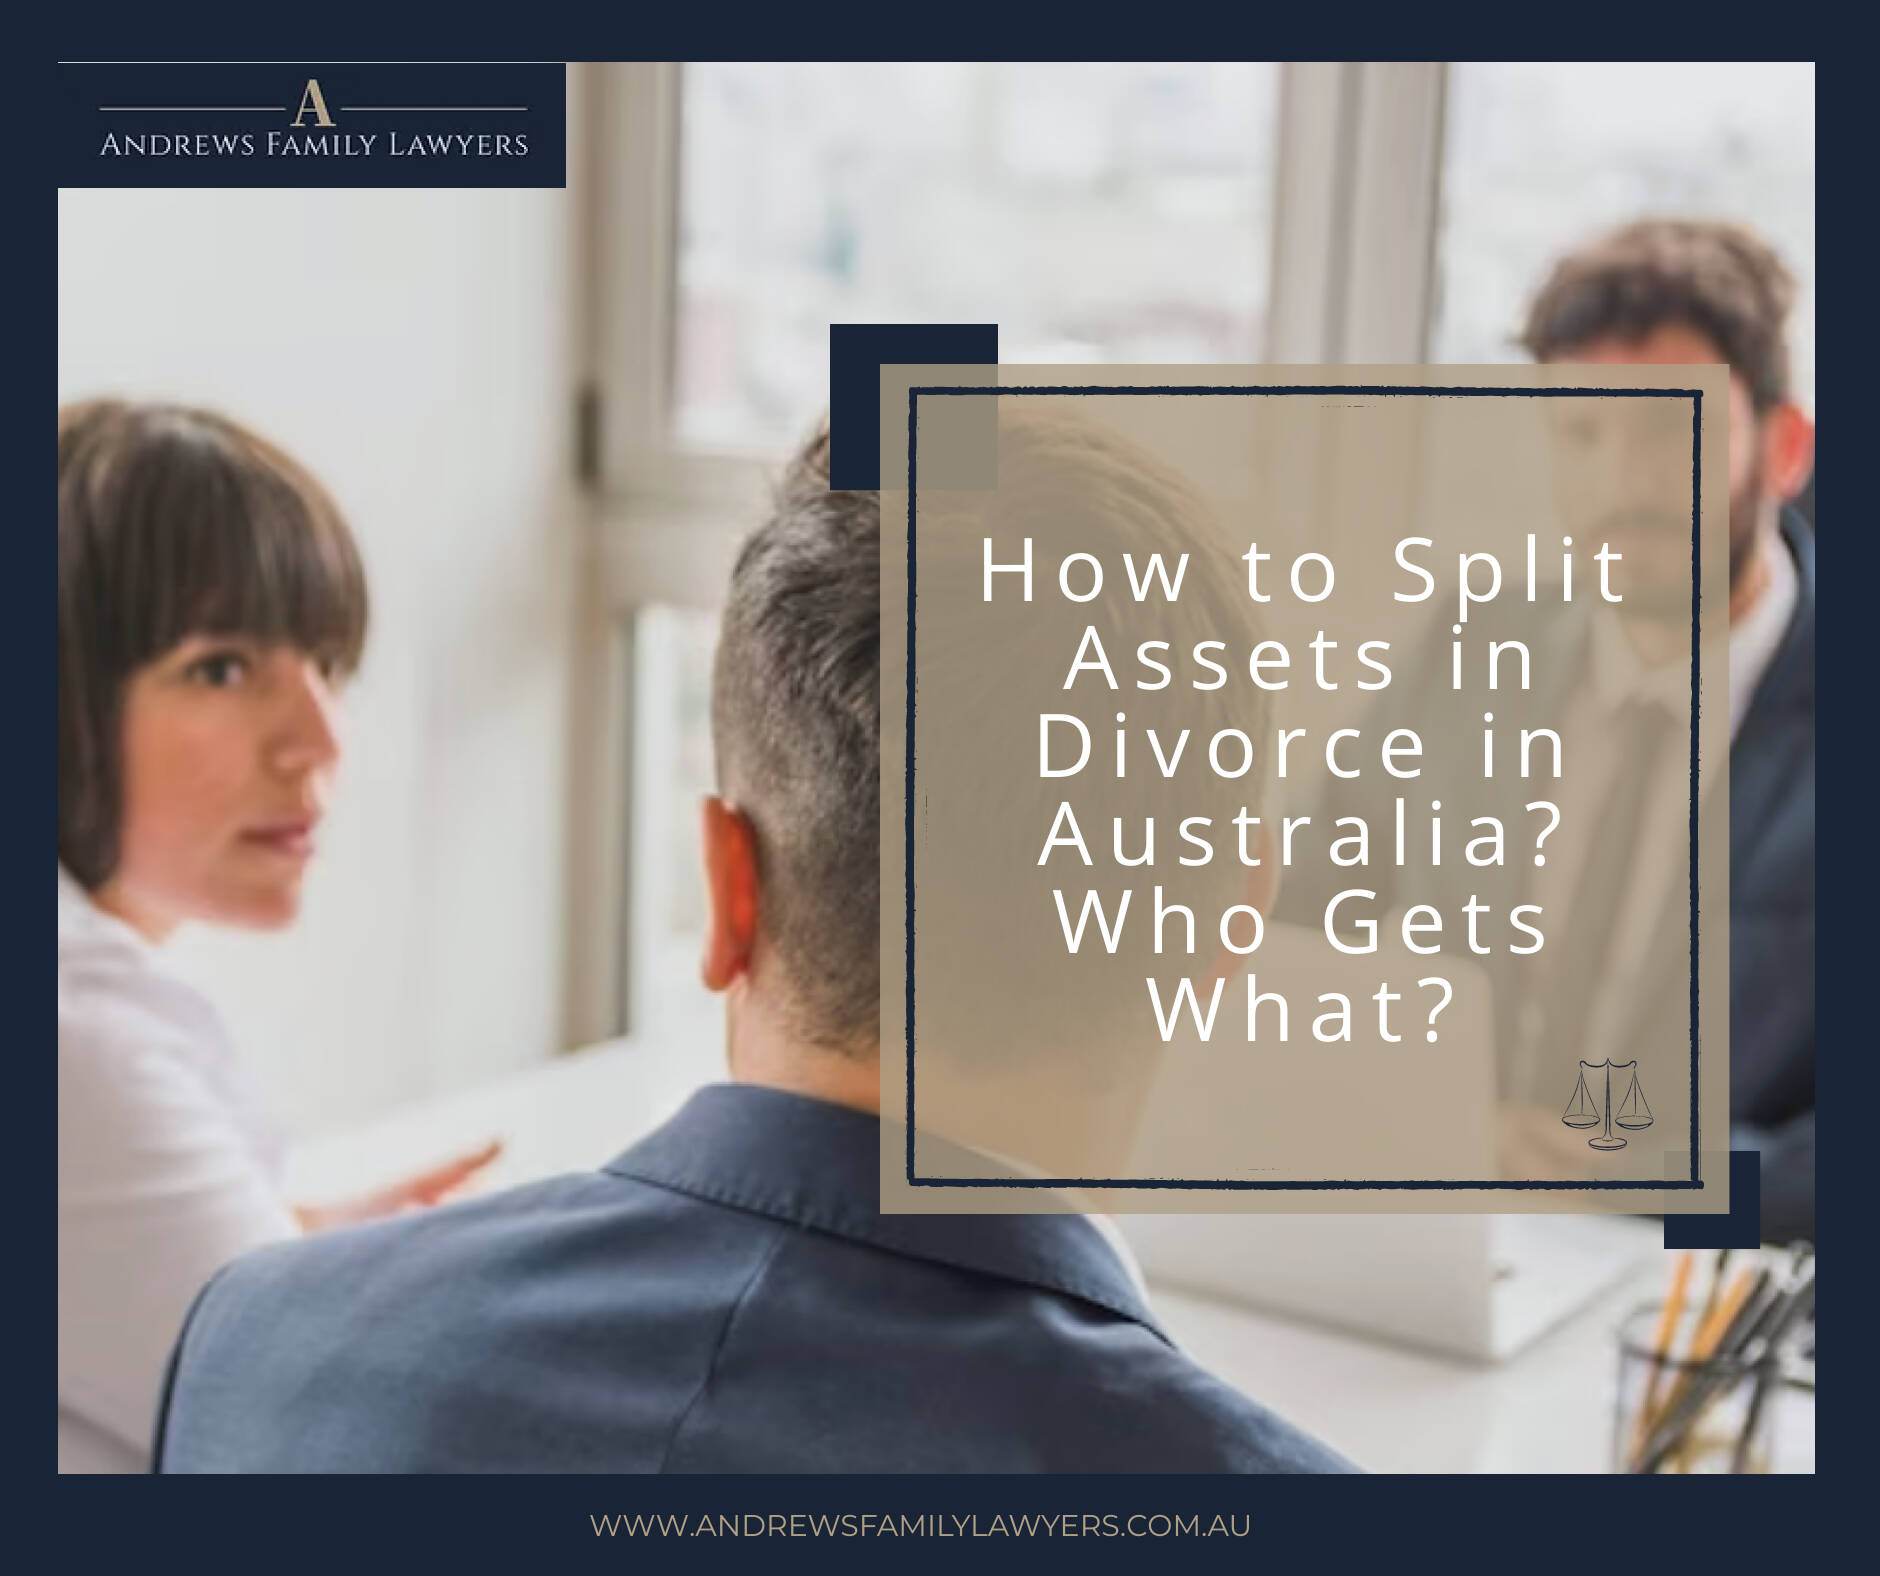 How to Split Assets in Divorce in Australia? Who Gets What?